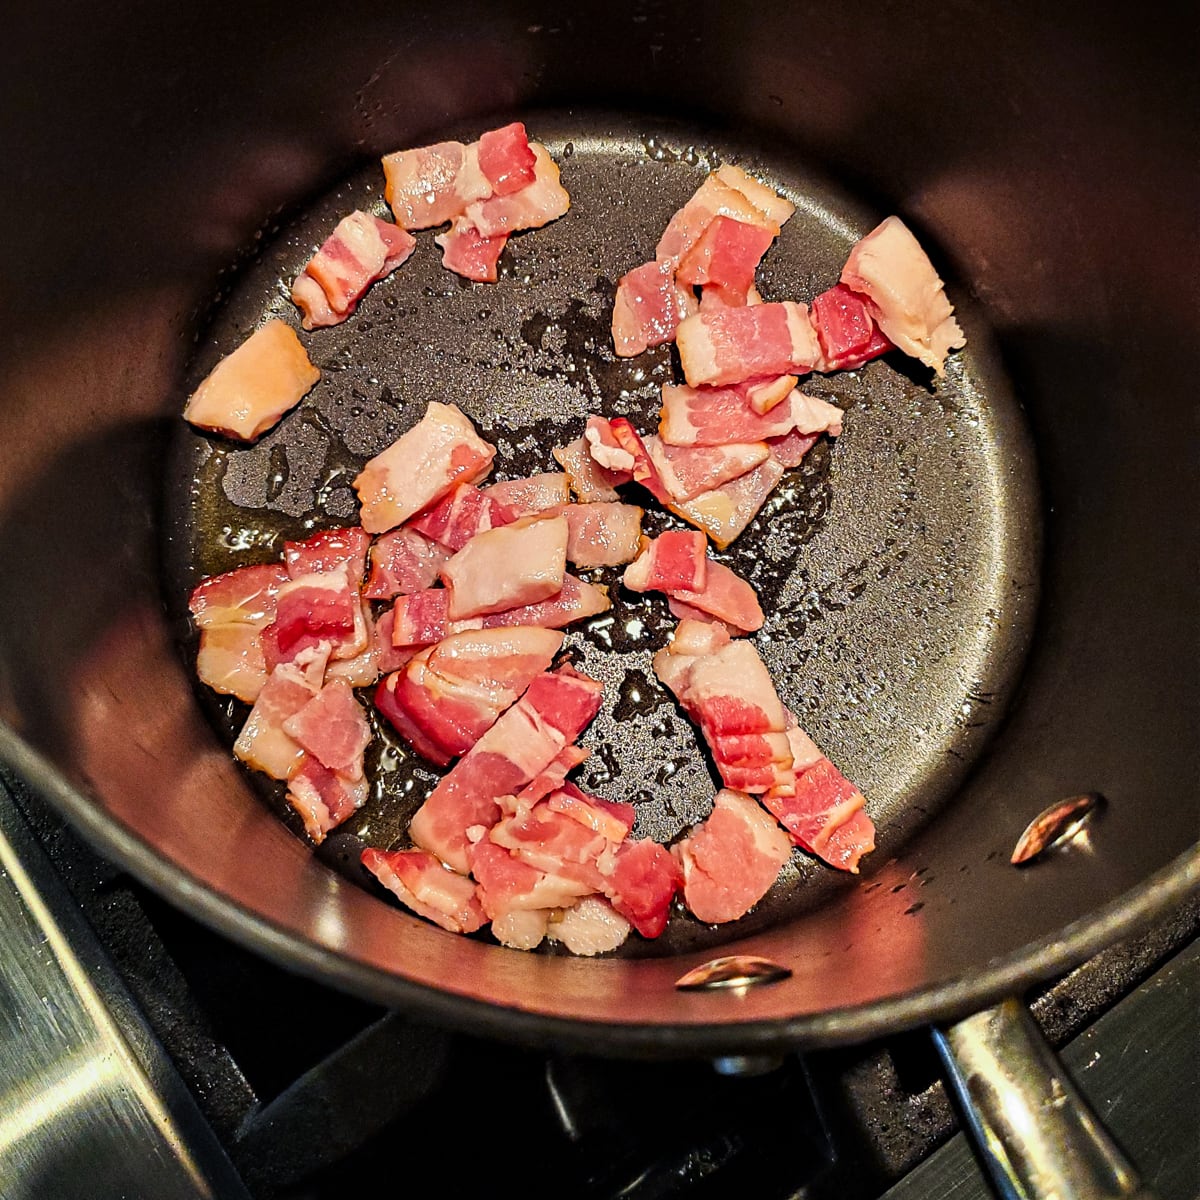 Bacon browning in a pan.